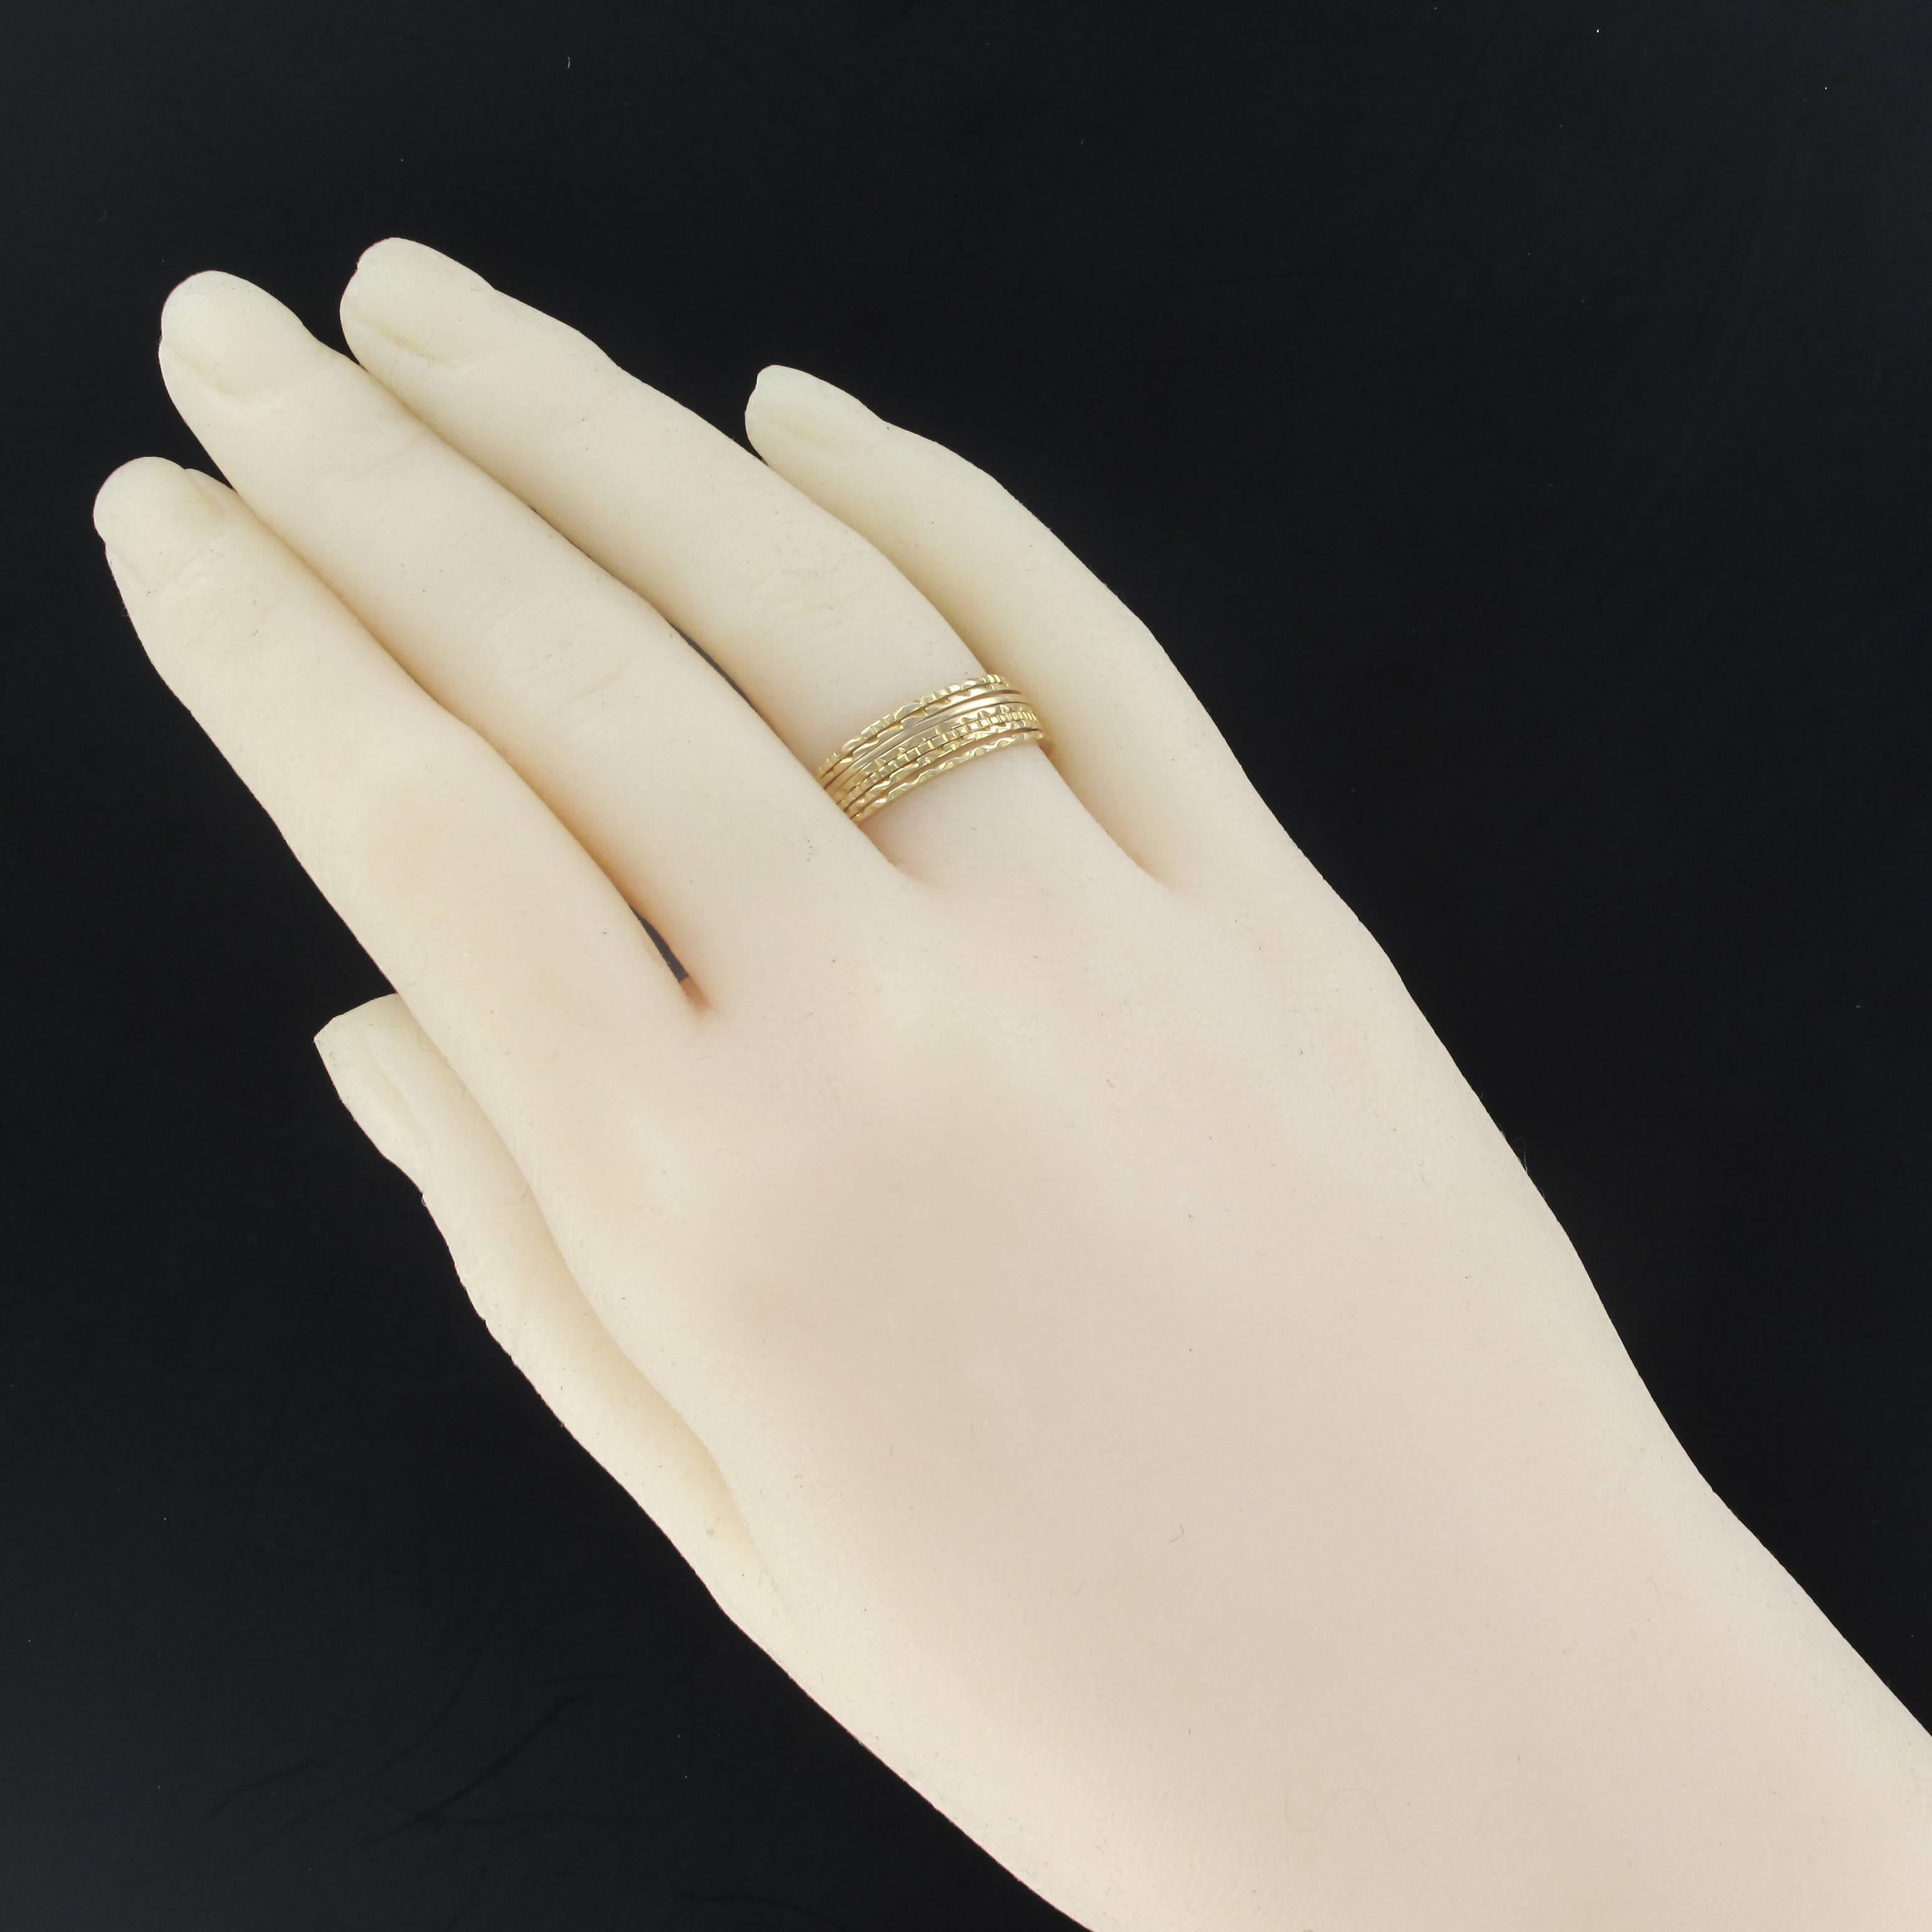 Ring in 18 karats yellow gold.
This ring is made of 7 gold rings each with a different decor and retained between them by a barette of gold.
Height: 7.1 mm, thickness: 1.1 mm.
US Size : 6, for another size please contact us.
Total weight of the